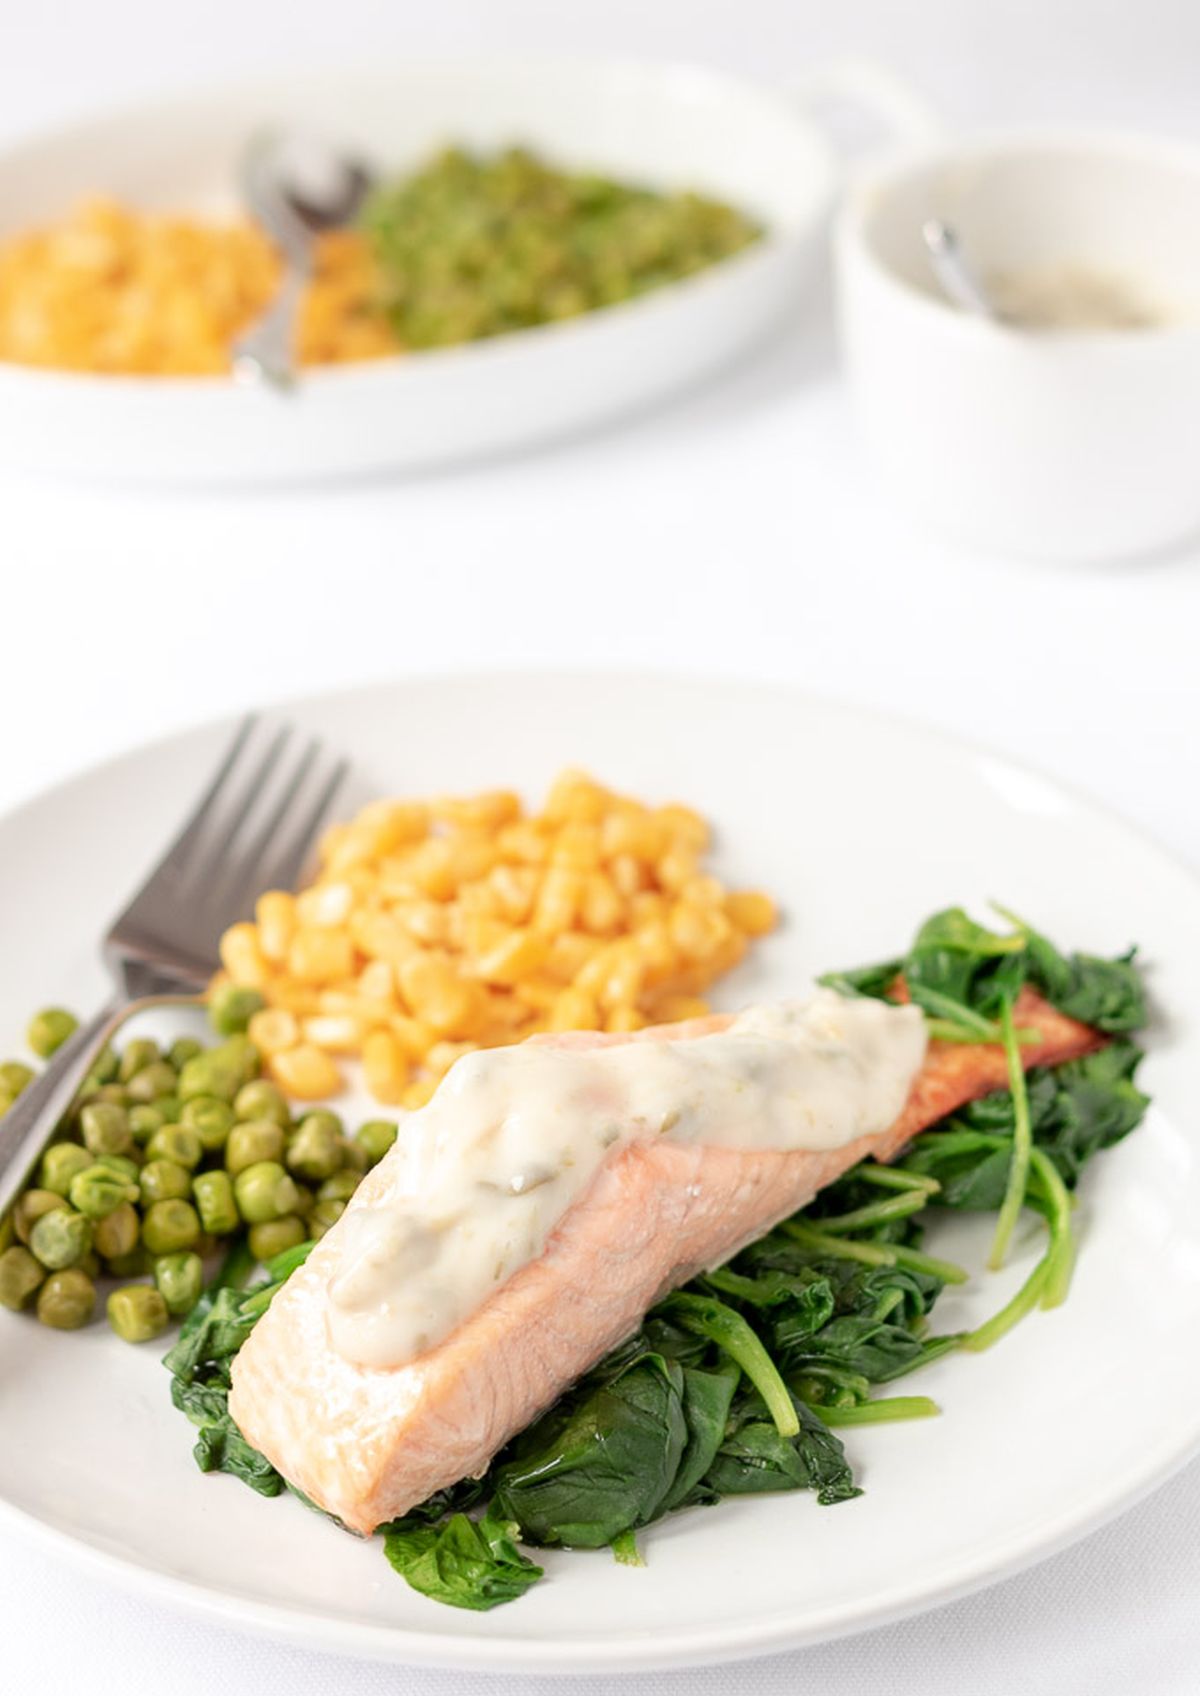 Healthy grilled salmon served on a bed of wilted spinach with a portion of sweetcorn and peas on a plate.